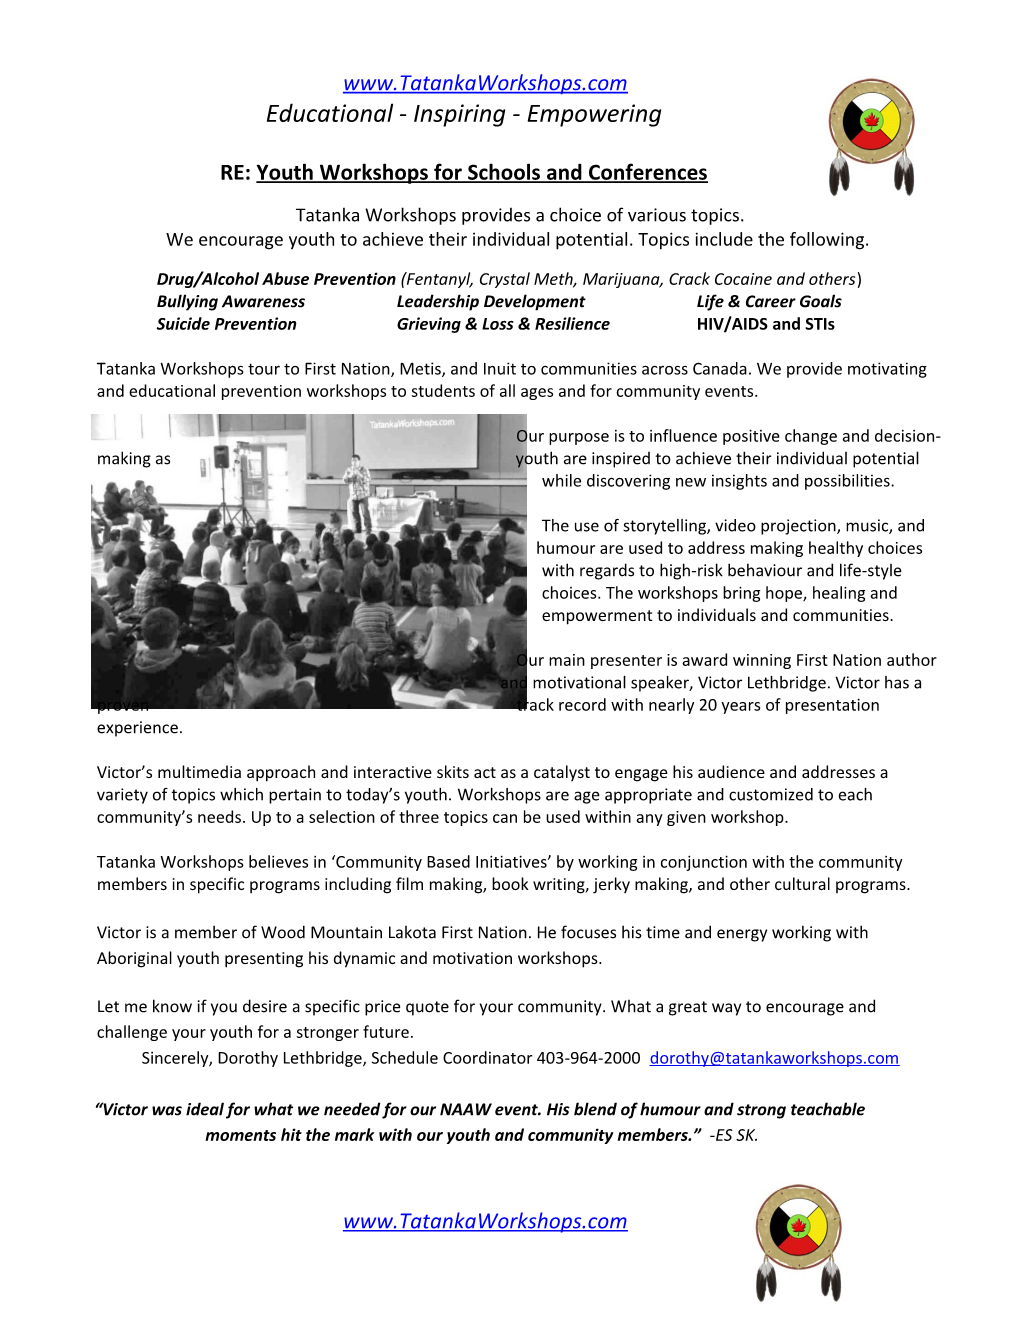 RE: Youth Workshops for Schoolsand Conferences